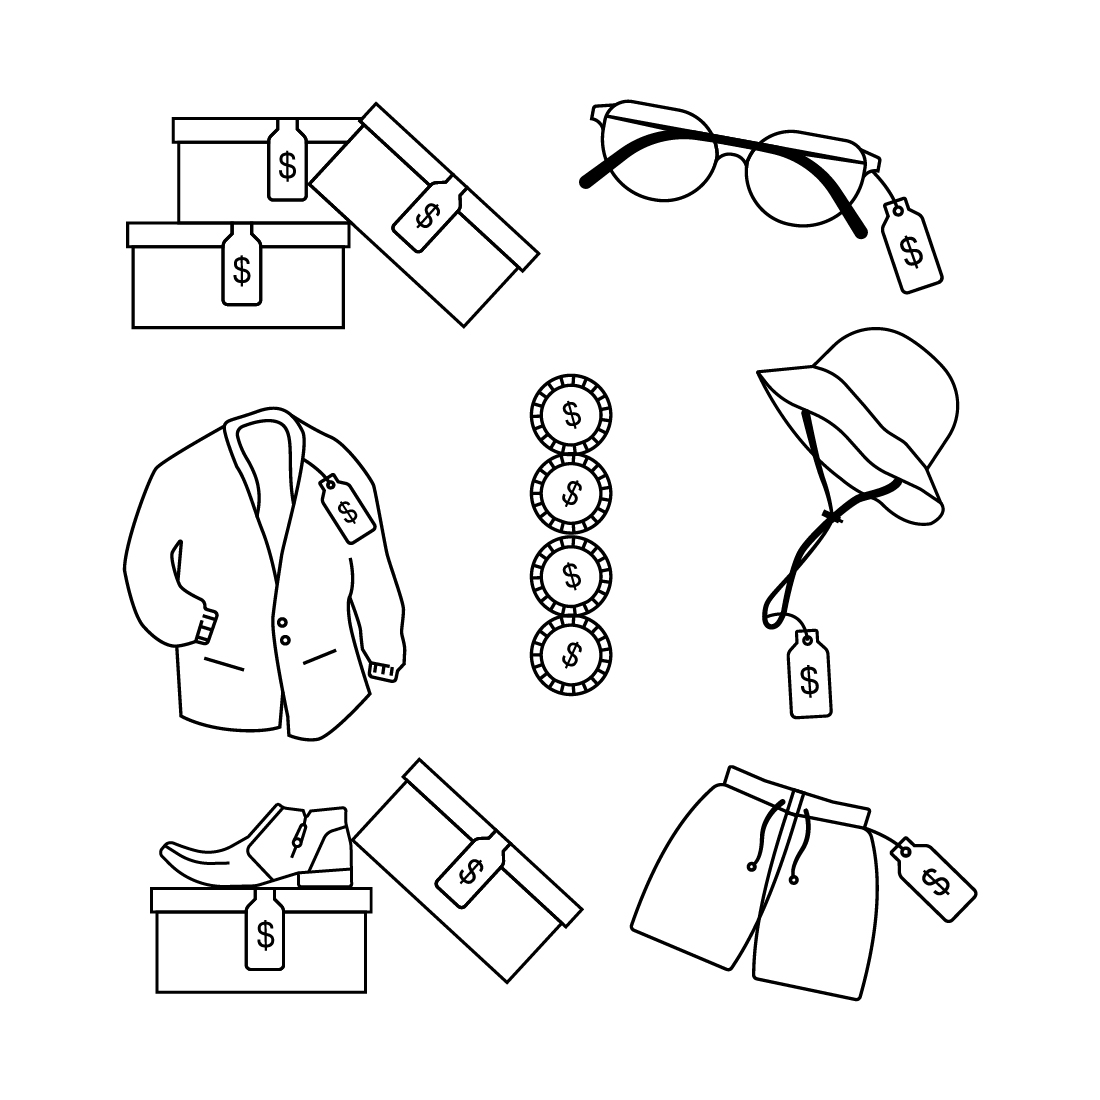 Black and white drawing of clothing and accessories.